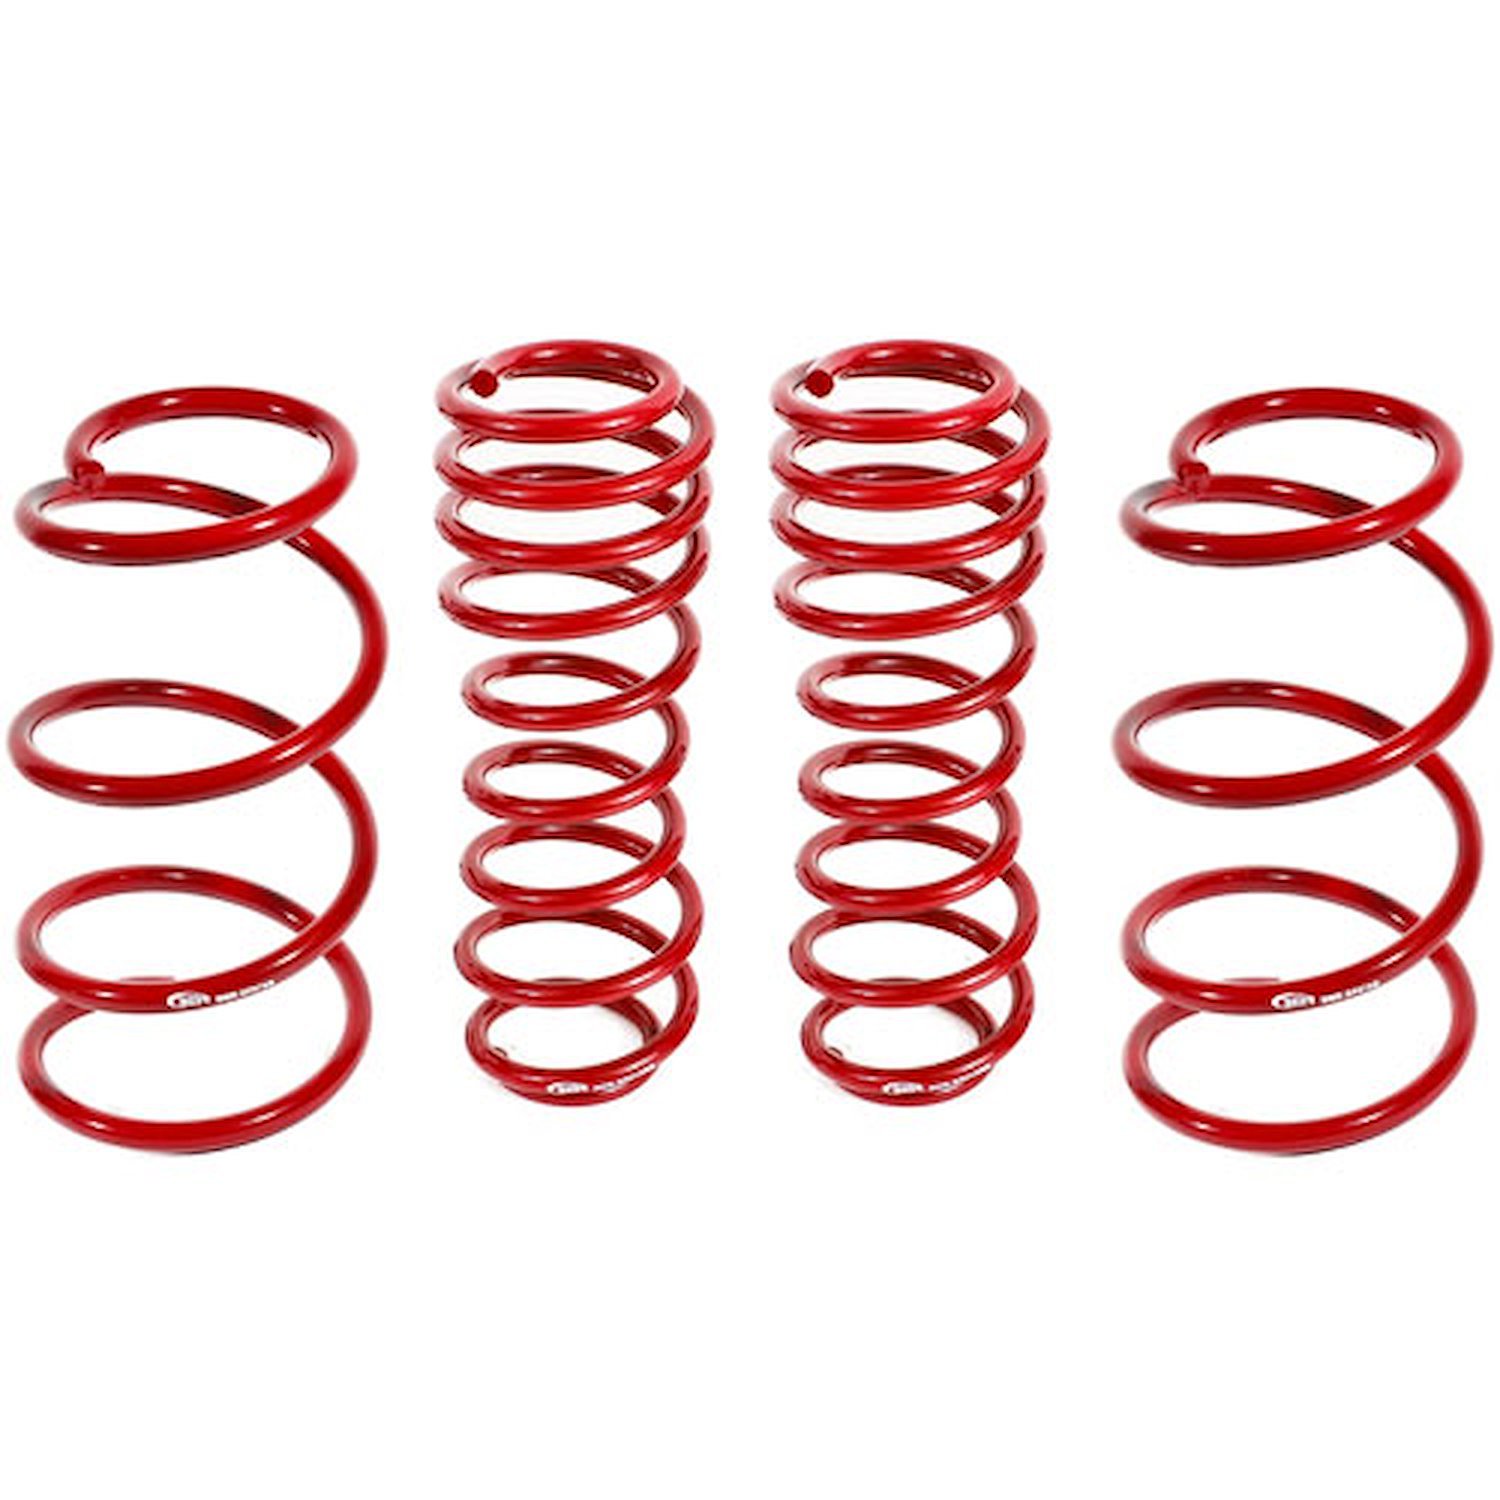 Drag Style Lowering Spring Kit 2007-14 Mustang Shelby